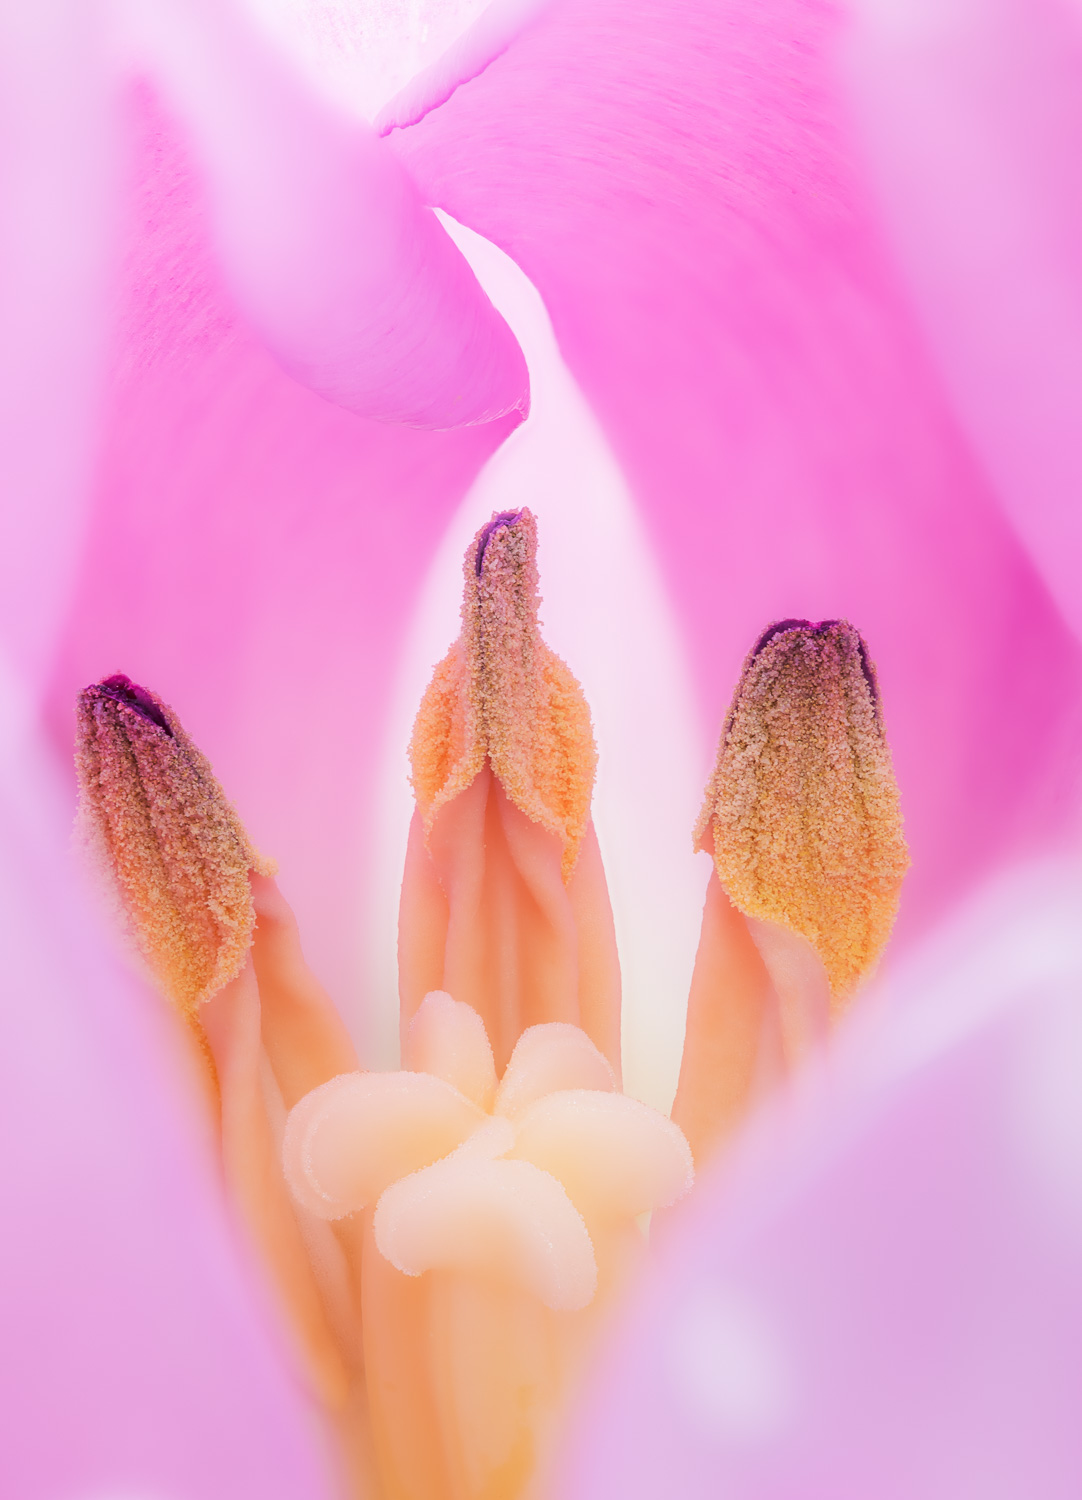 A close-up selective focus look at pollen-coated stamens and the pistil inside a backlit tulip. Image#1620